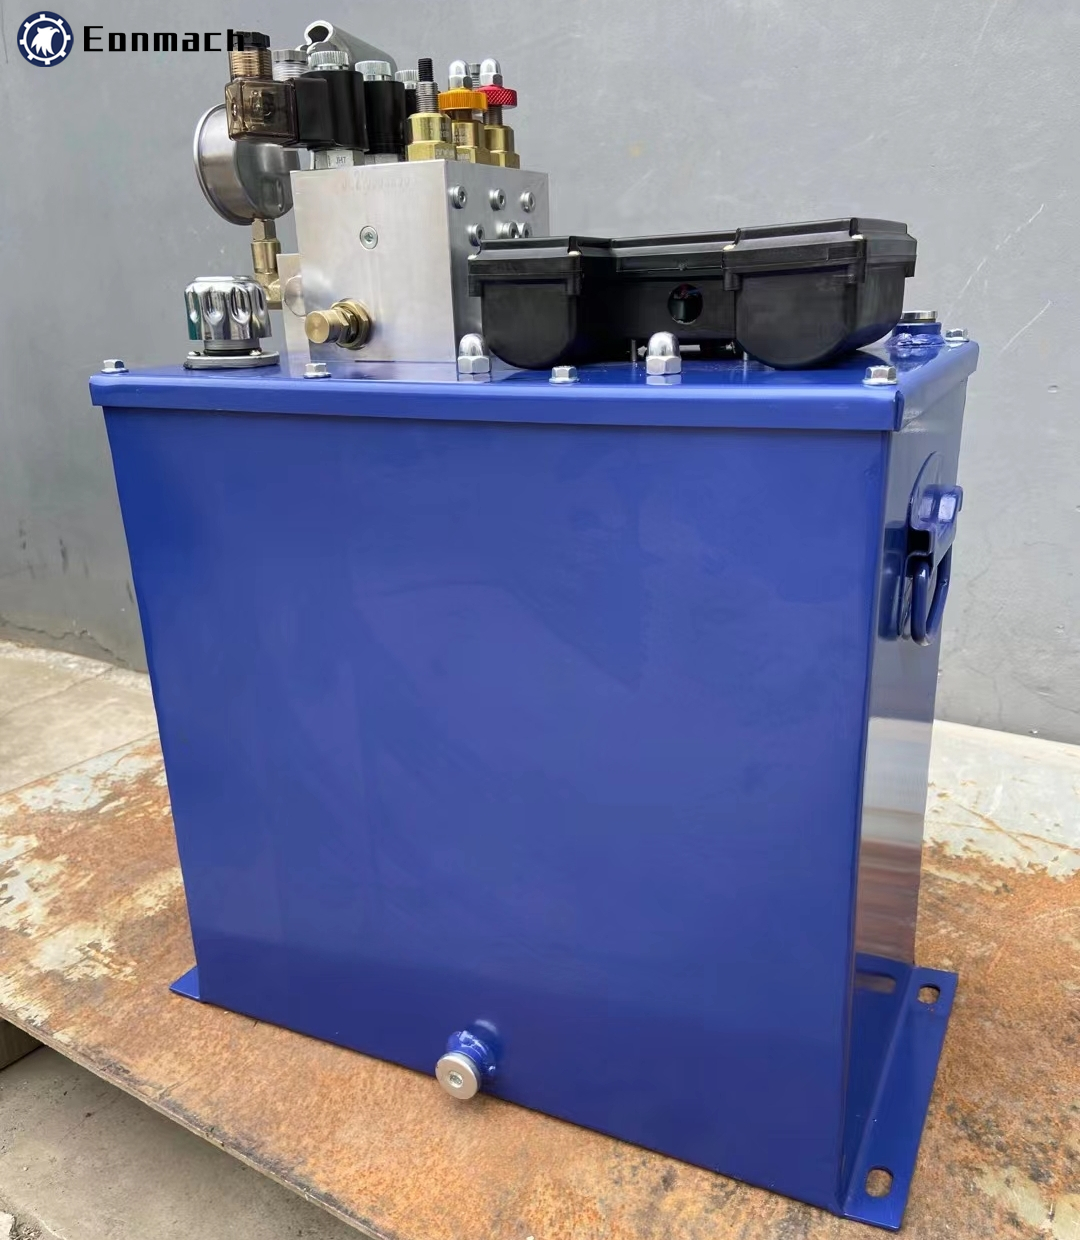 Low Noise Hydraulic Power Unit for Home Lift ,lift Platform And Elevator